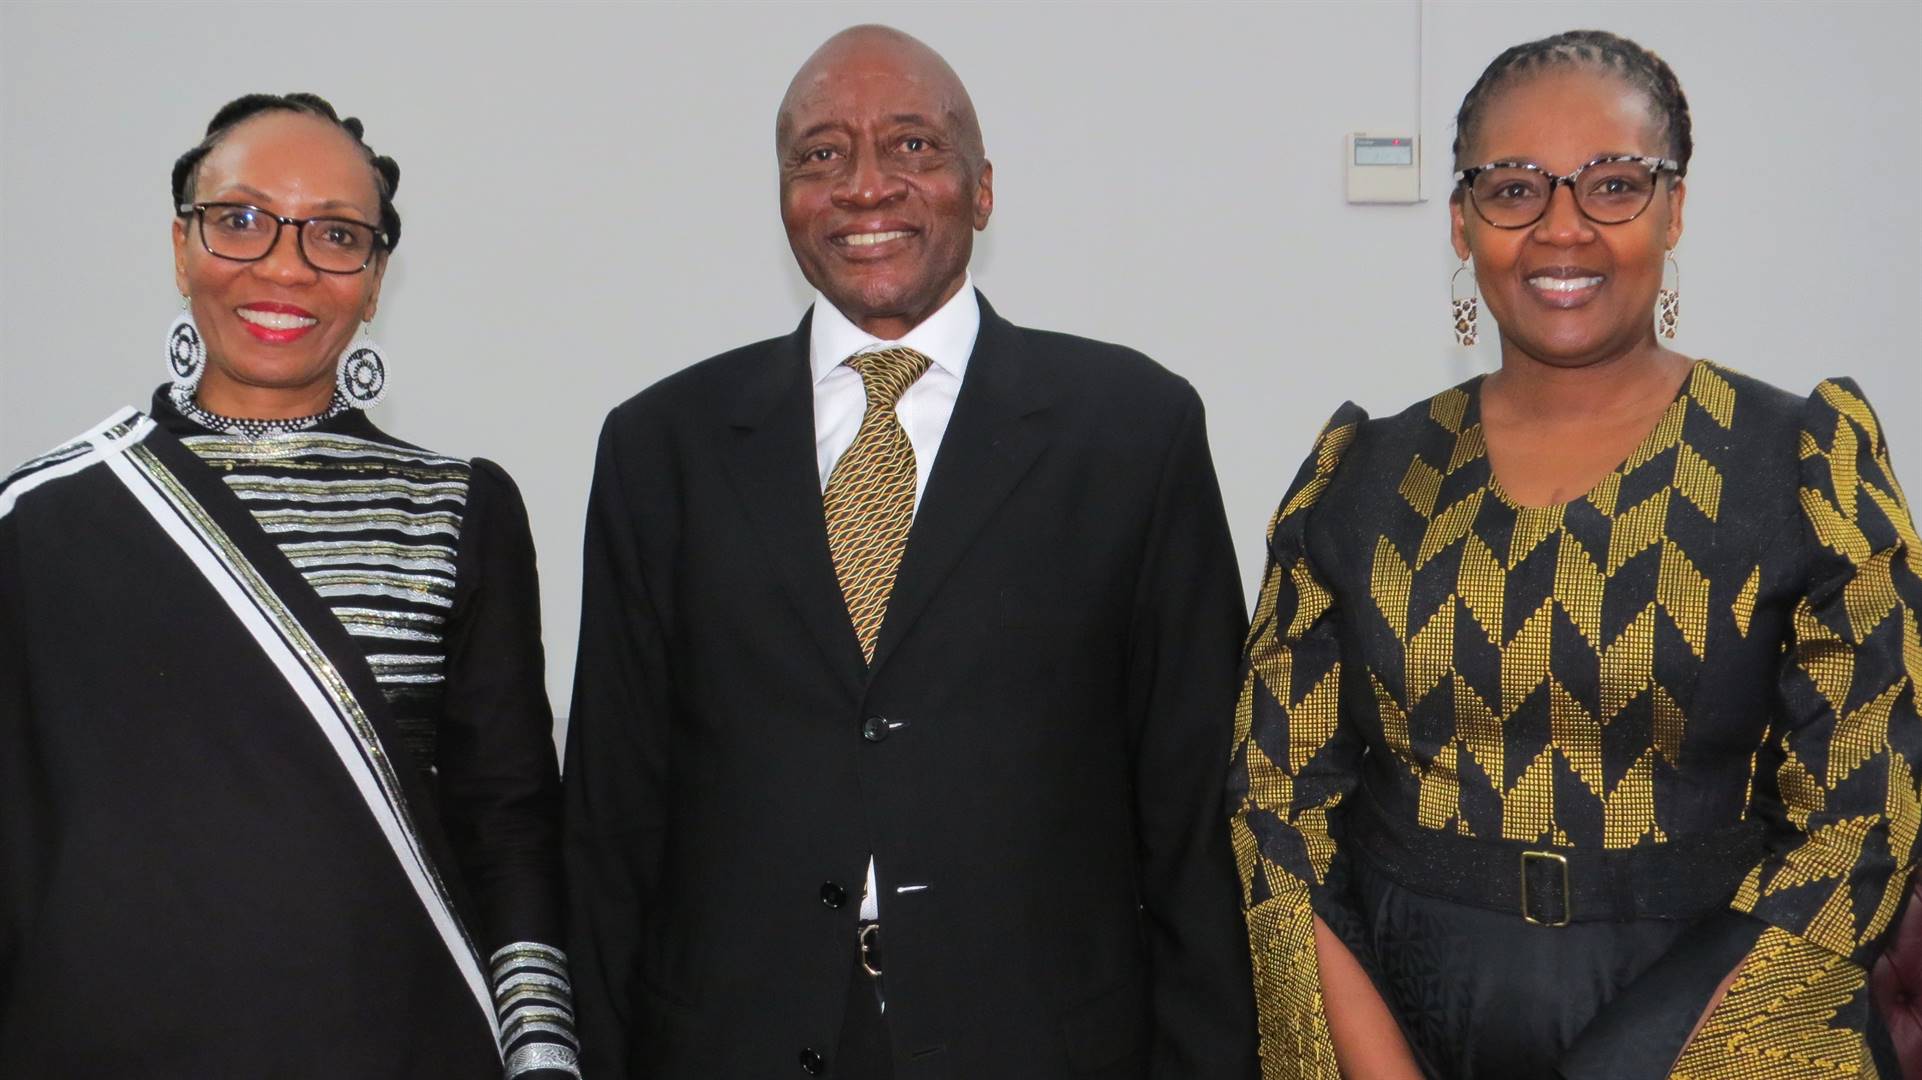 The new chancellor of the Central University of Technology (CUT), Free State, Dr Thabane Vincent Maphai (middle) with predecessor Judge Mahube Molemela (left) and Prof. Pamela Dube (vice-chancellor and principal of the CUT).Photo: Teboho Setena